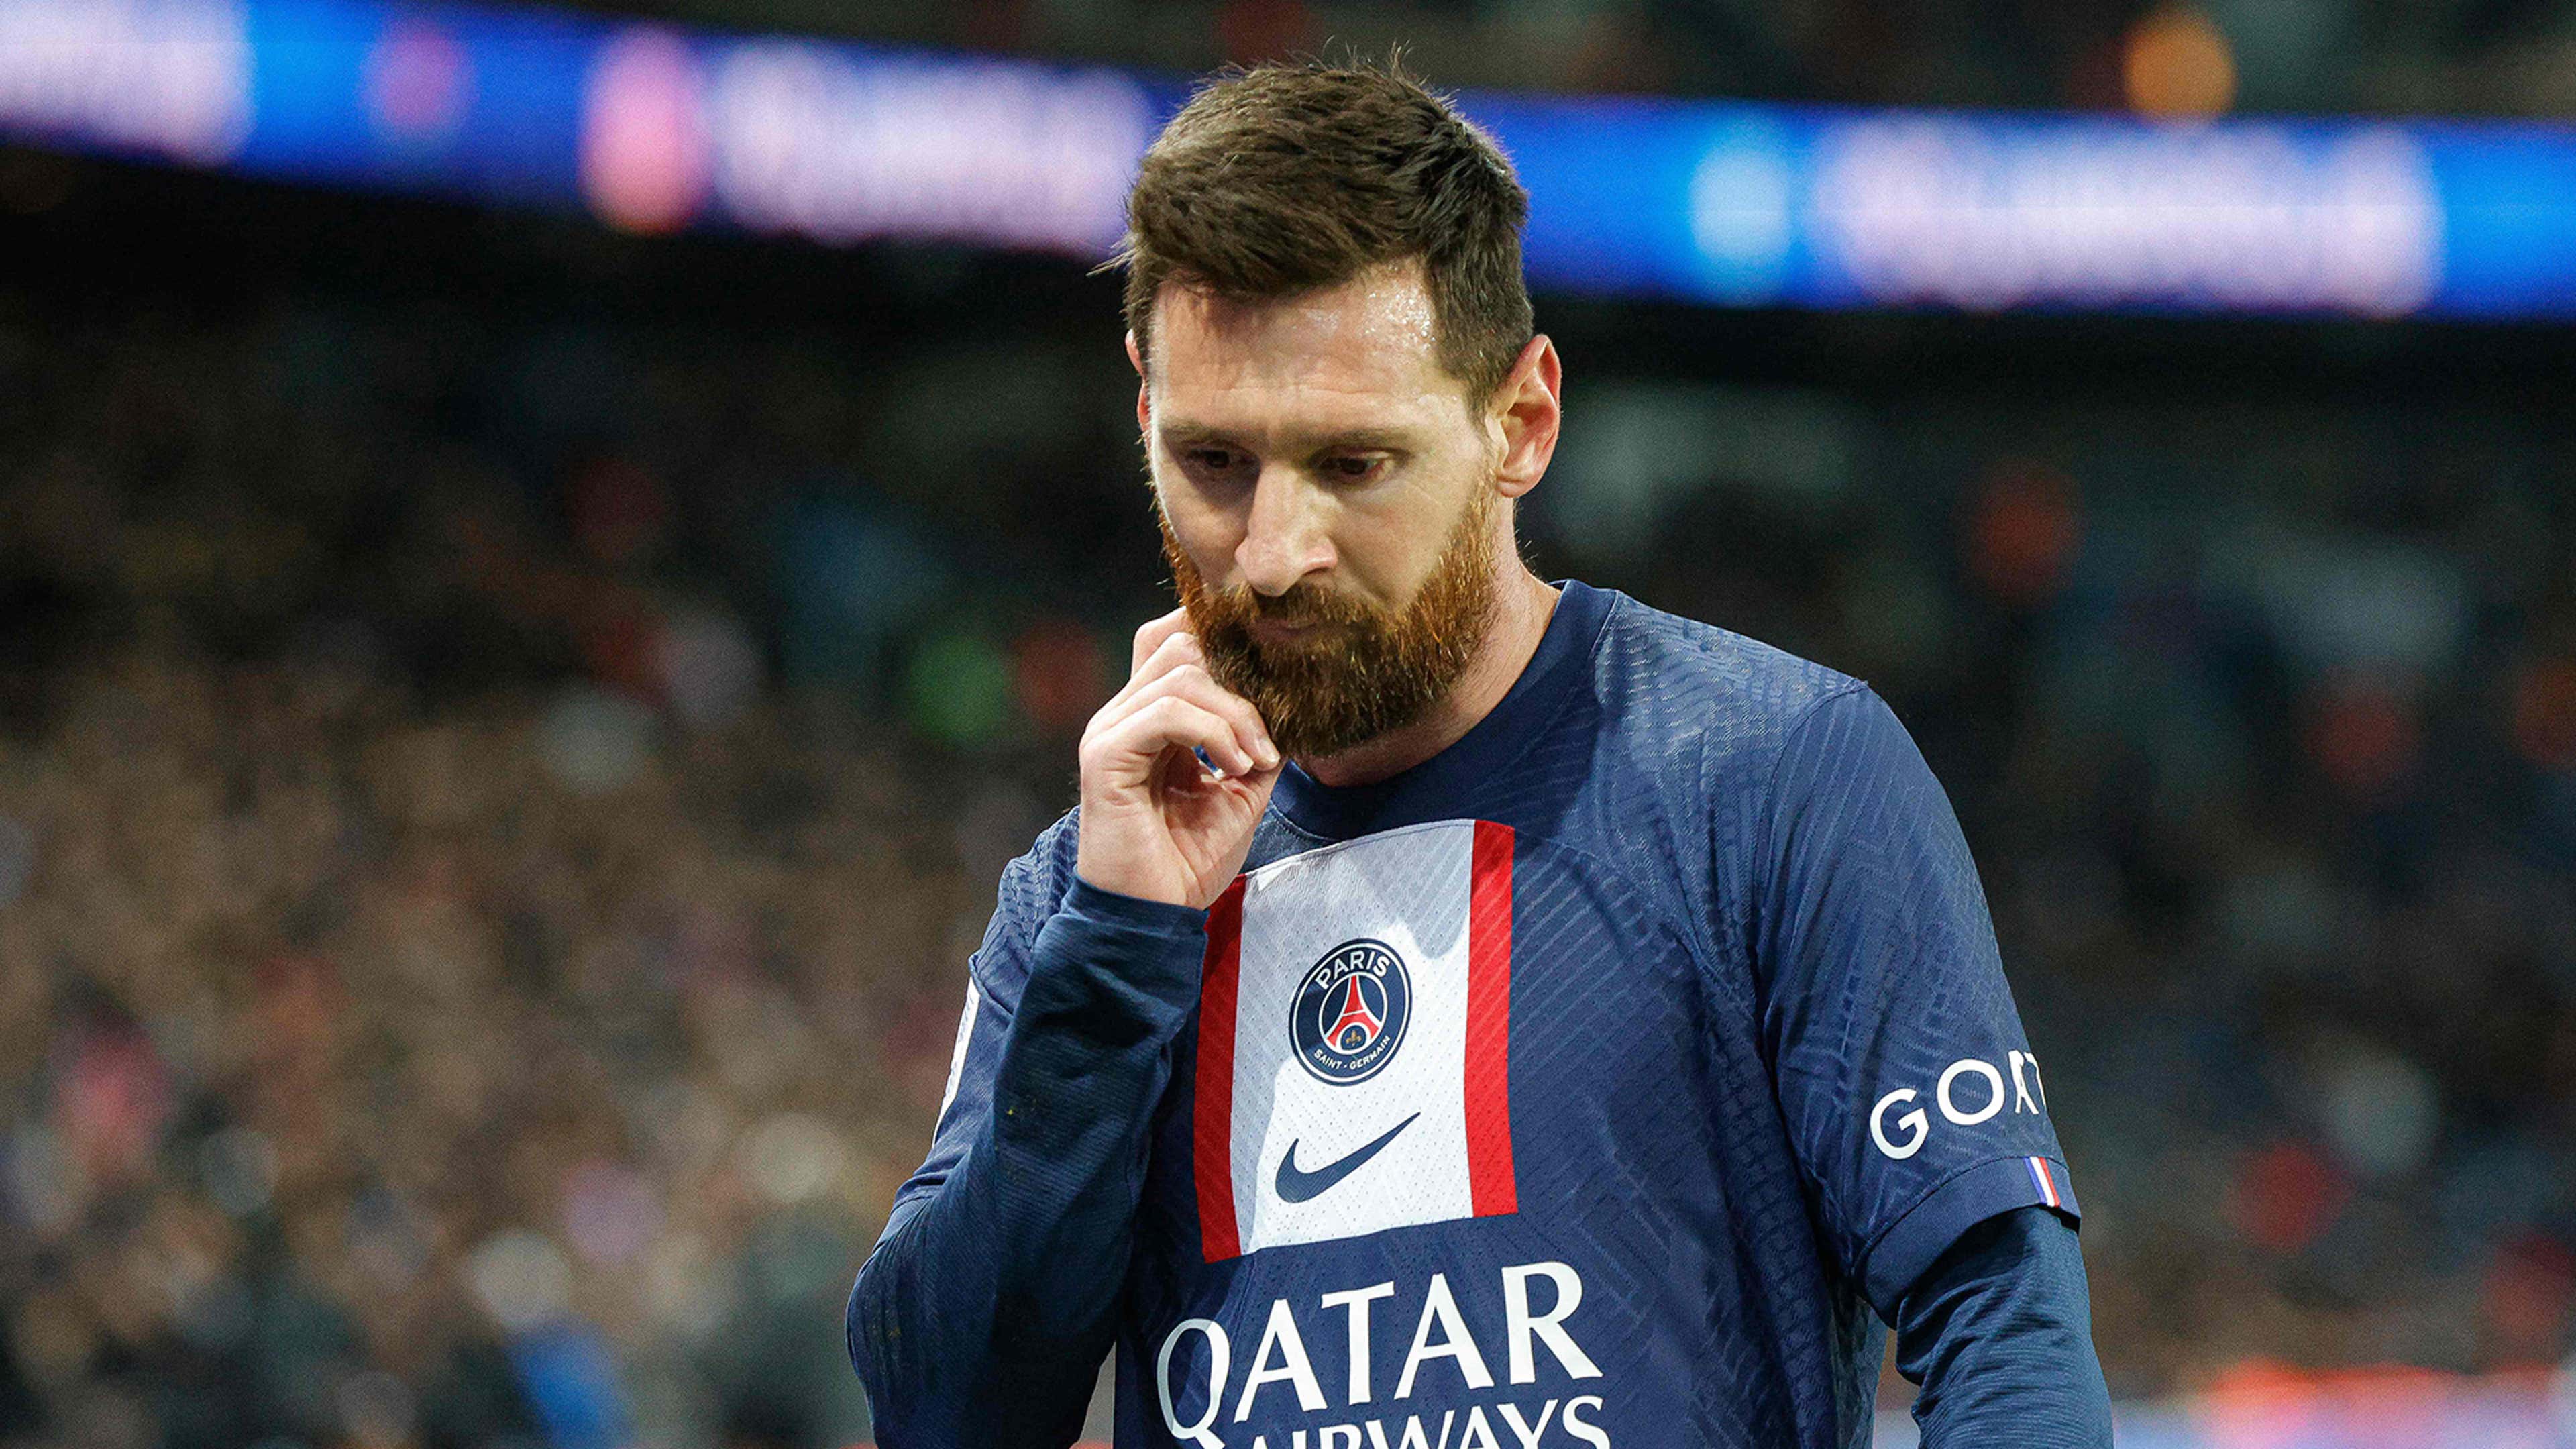 Lionel Messi yet to agree to PSG renewal - report - Barca Blaugranes